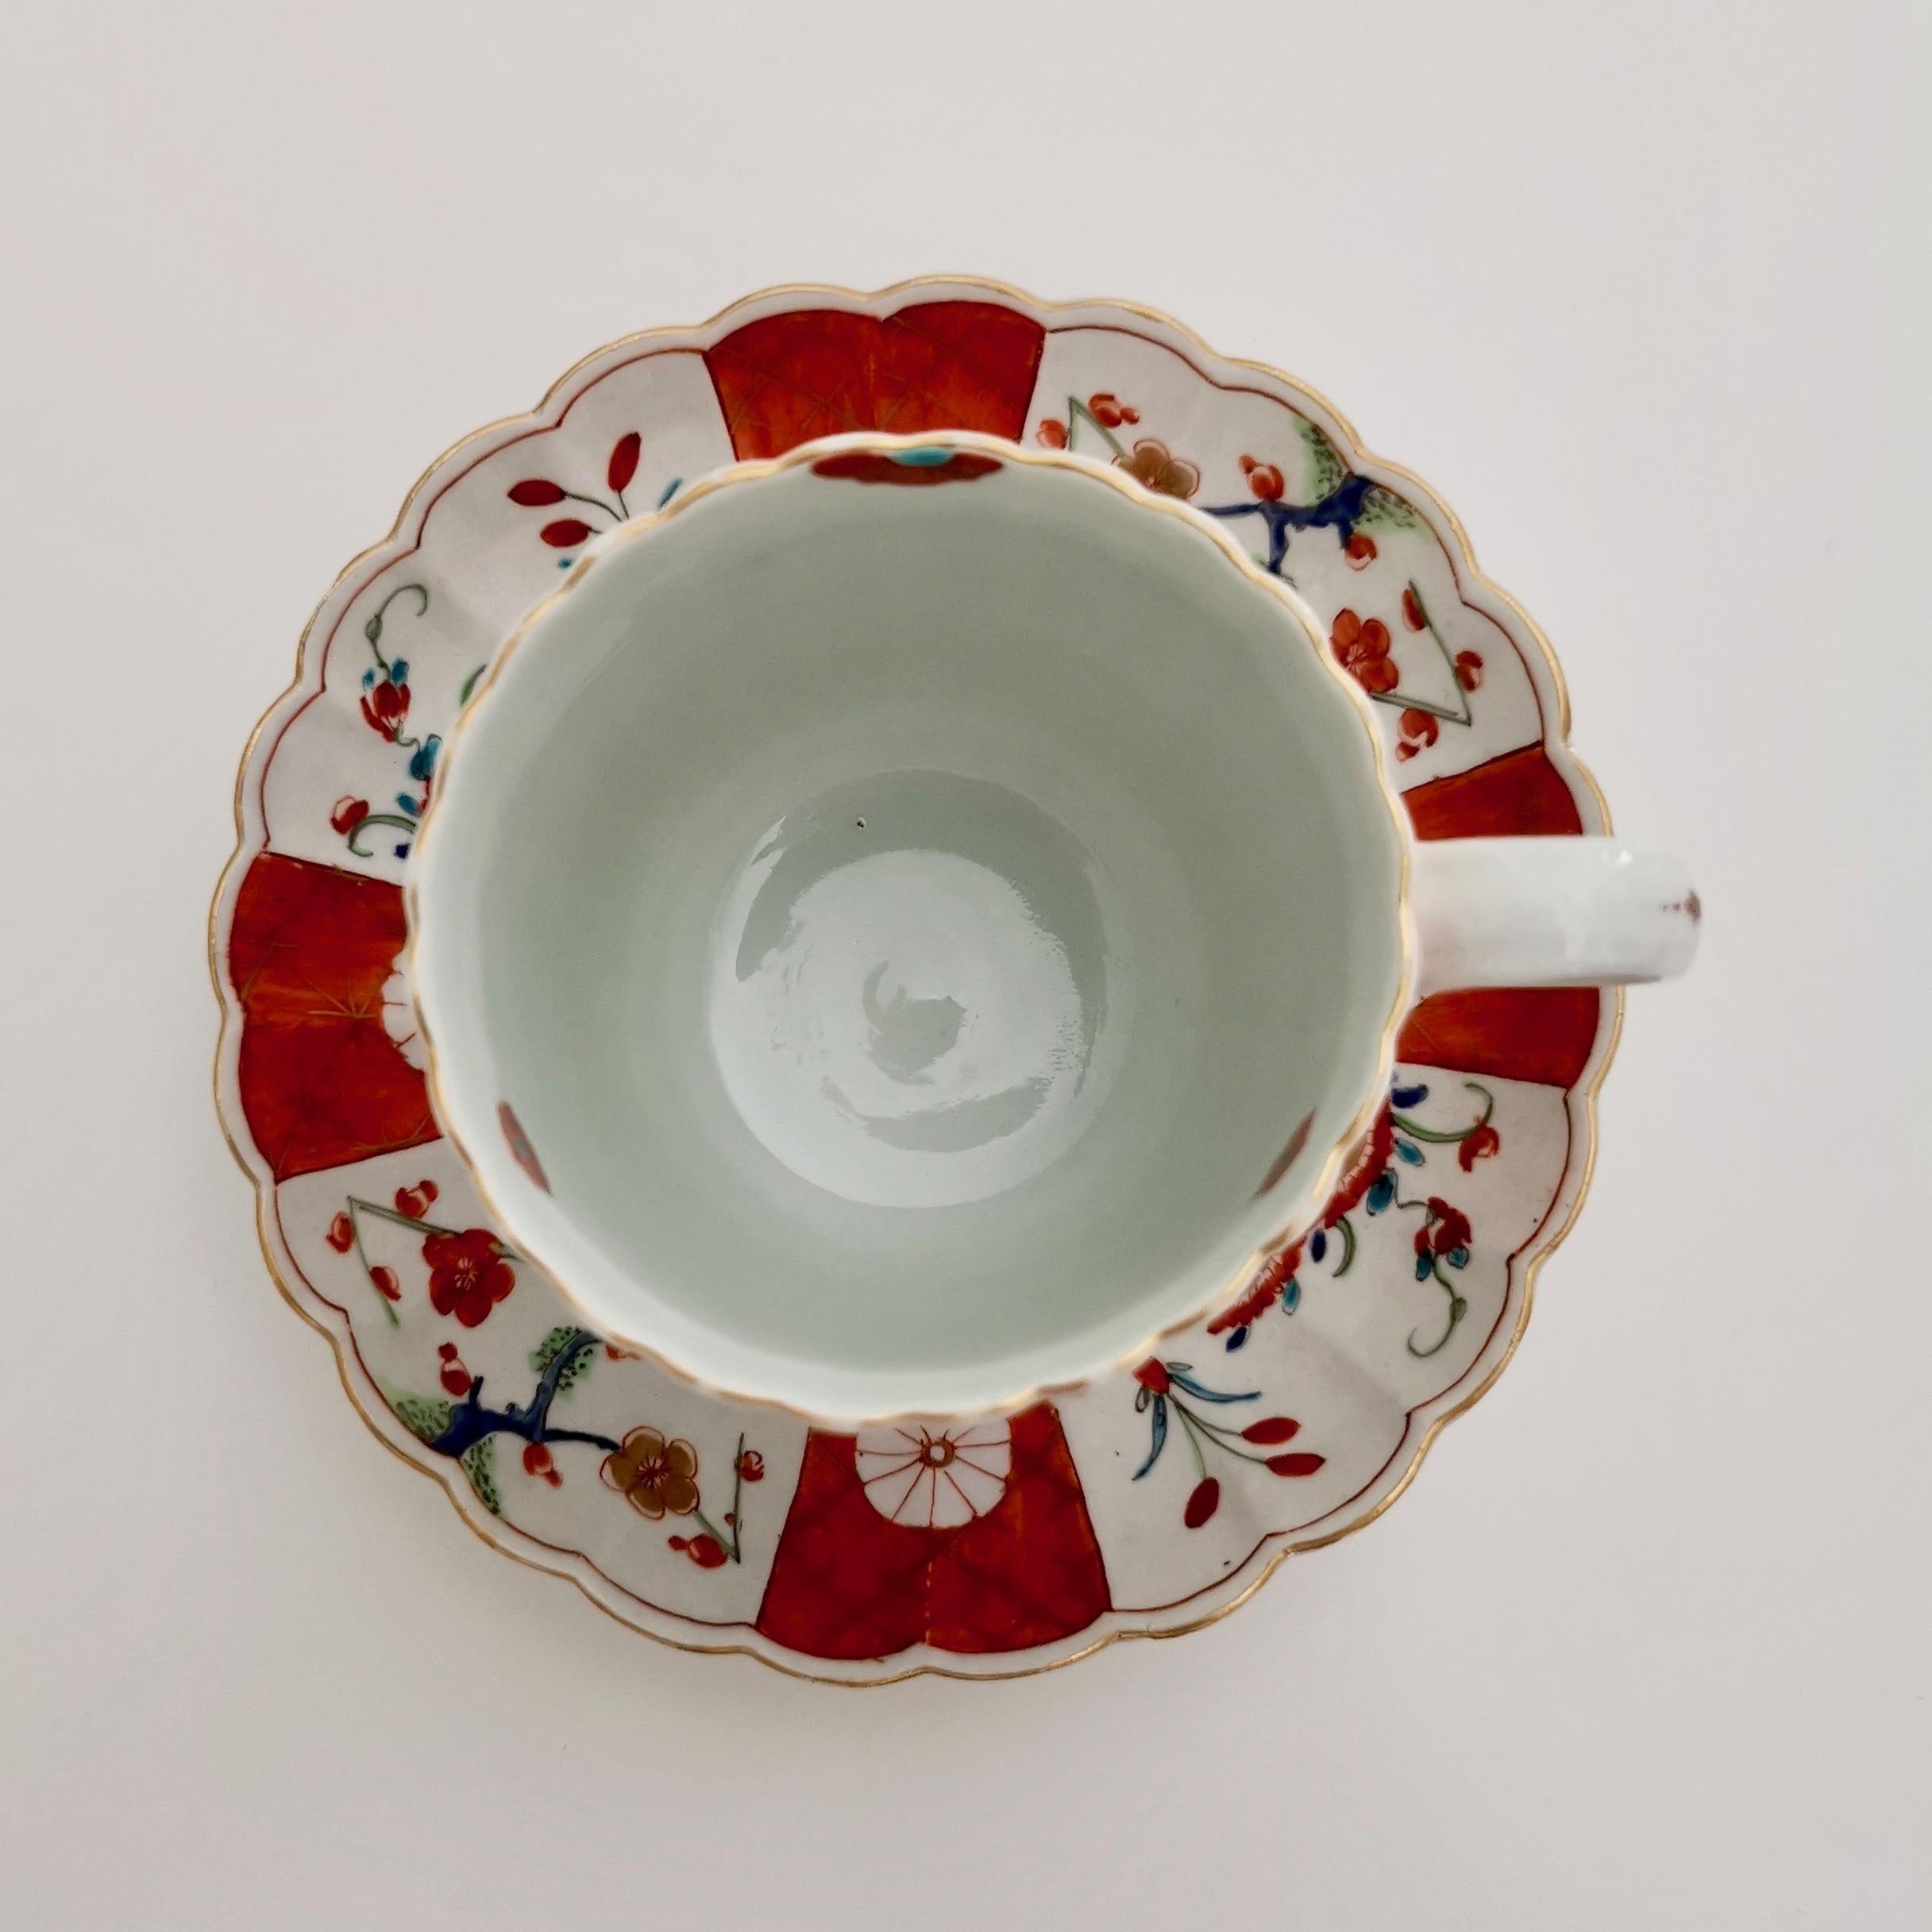 English Worcester Porcelain Coffee Cup, Giles Old Scarlet Japan, 18th Century circa 1770